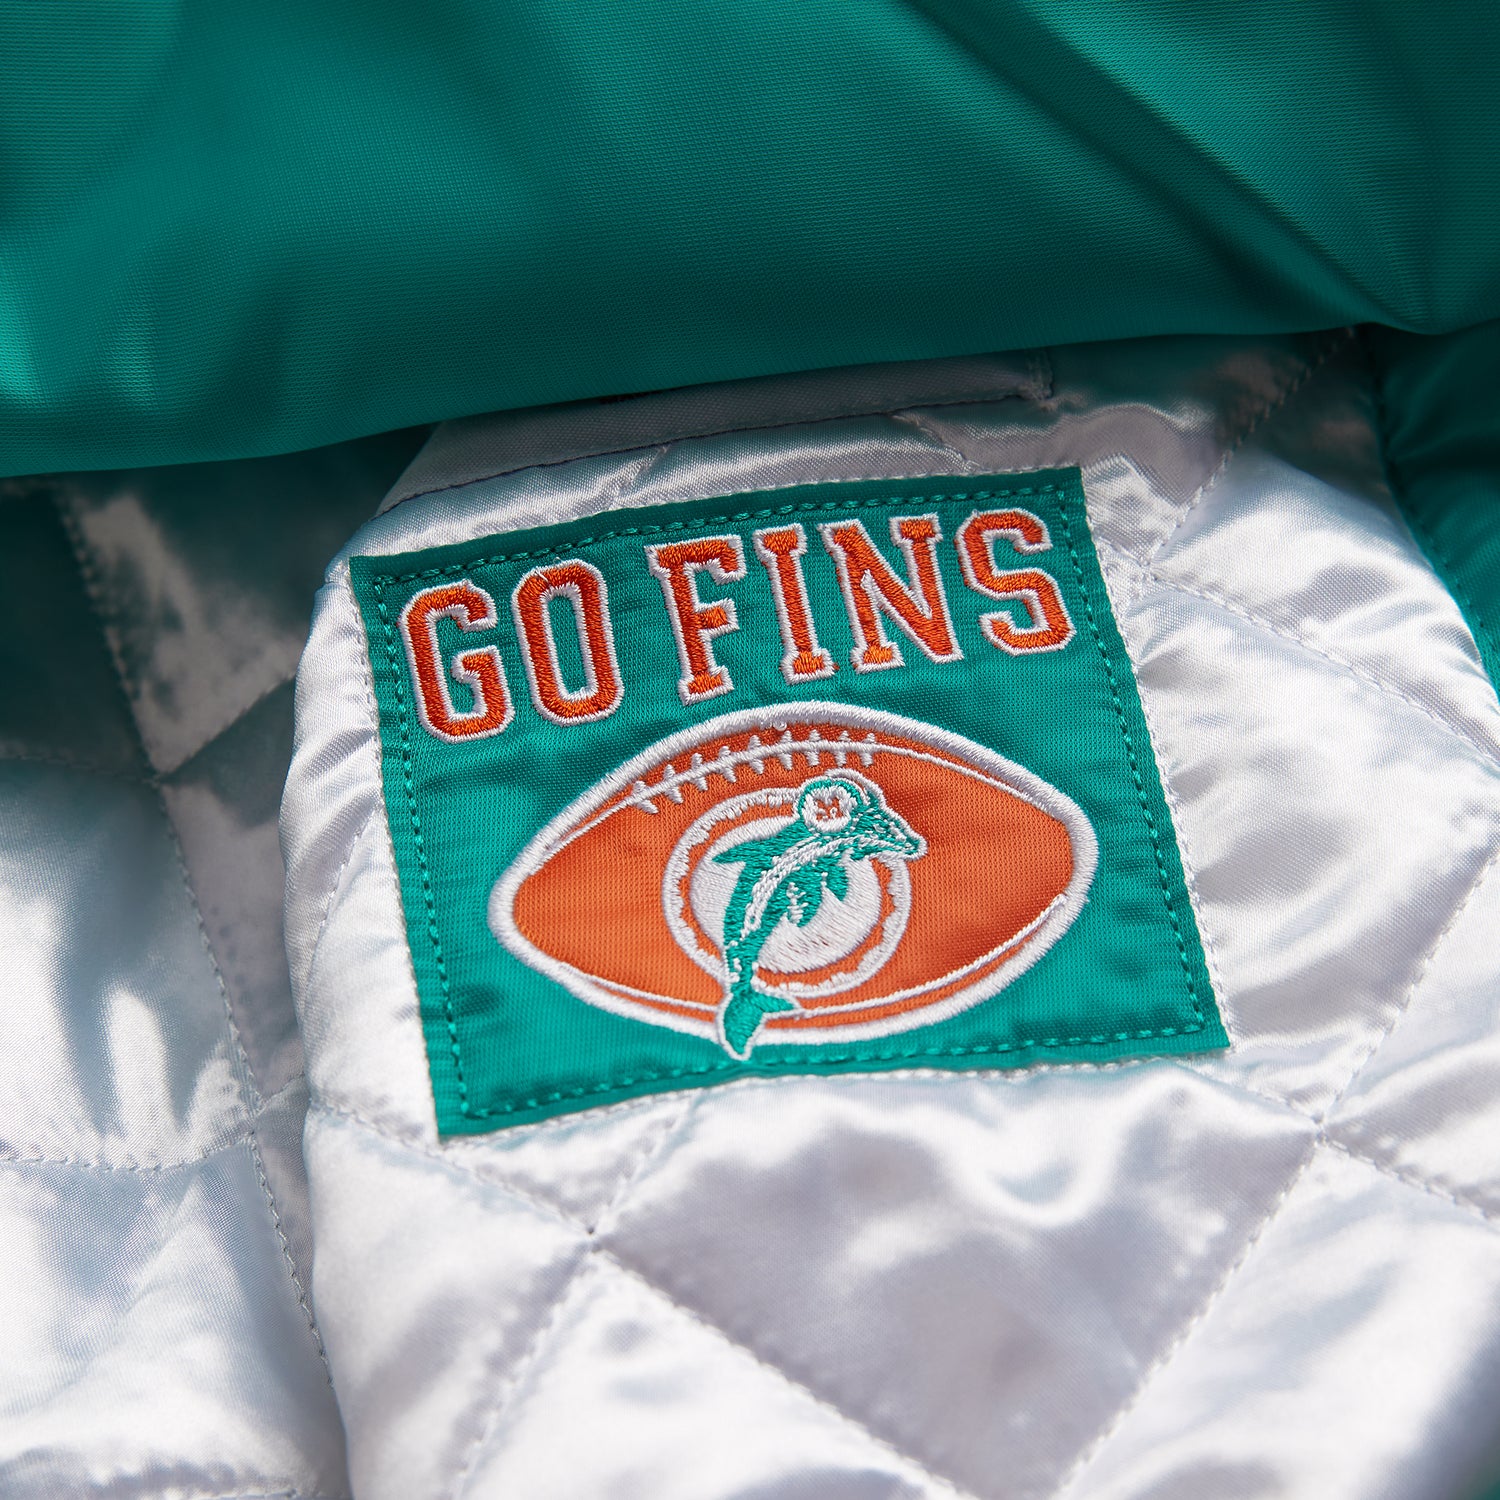 Starter Miami Dolphins Active Jerseys for Men